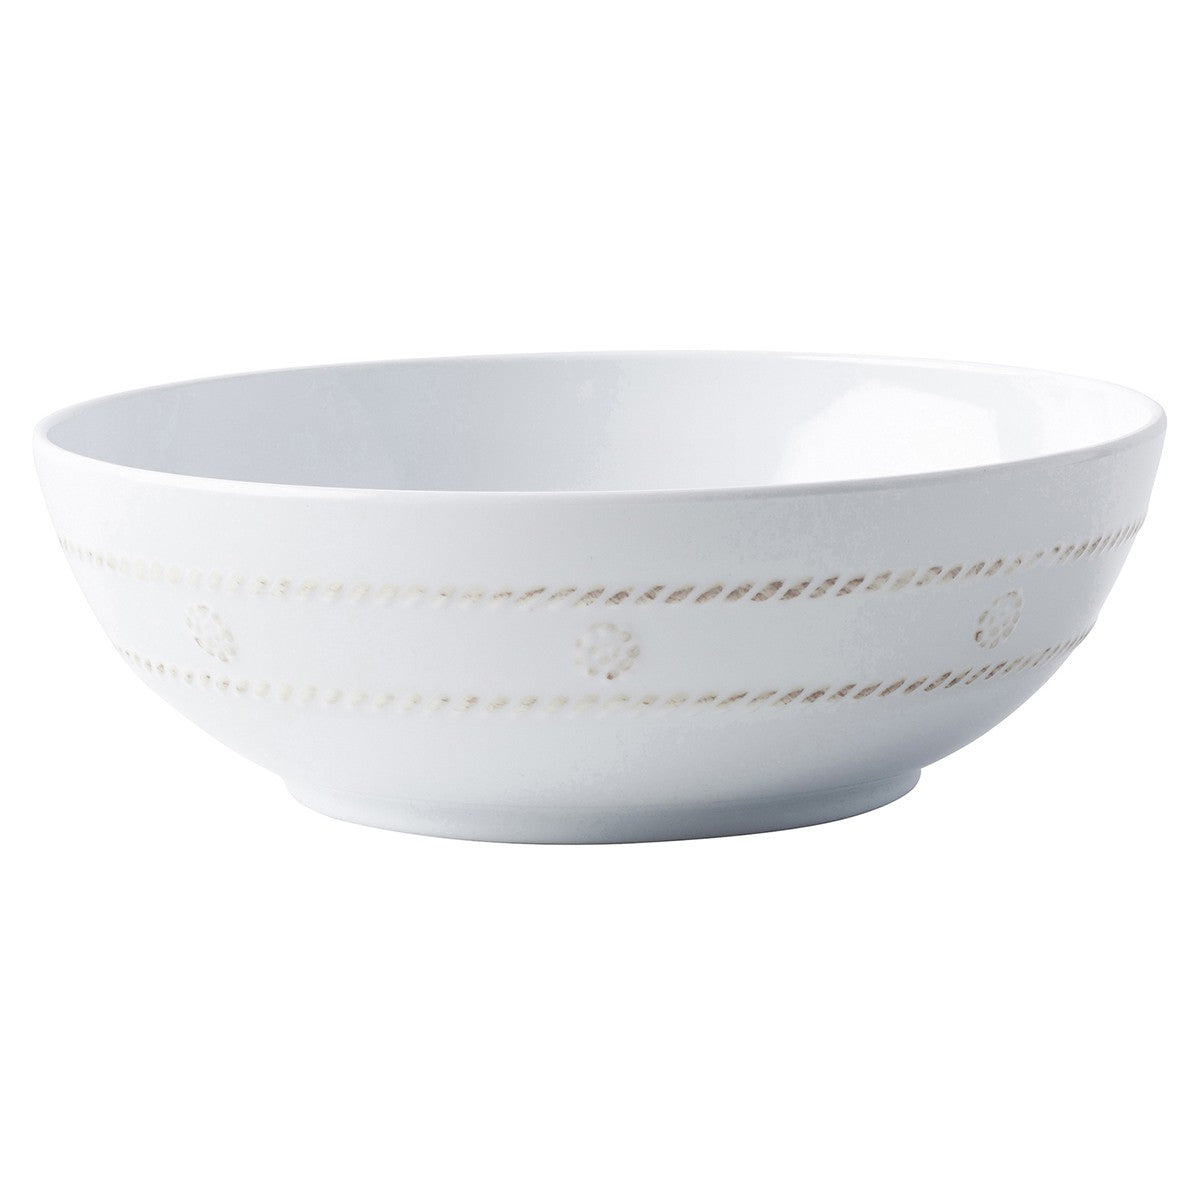 berry and thread melamine coupe bowl on a white background